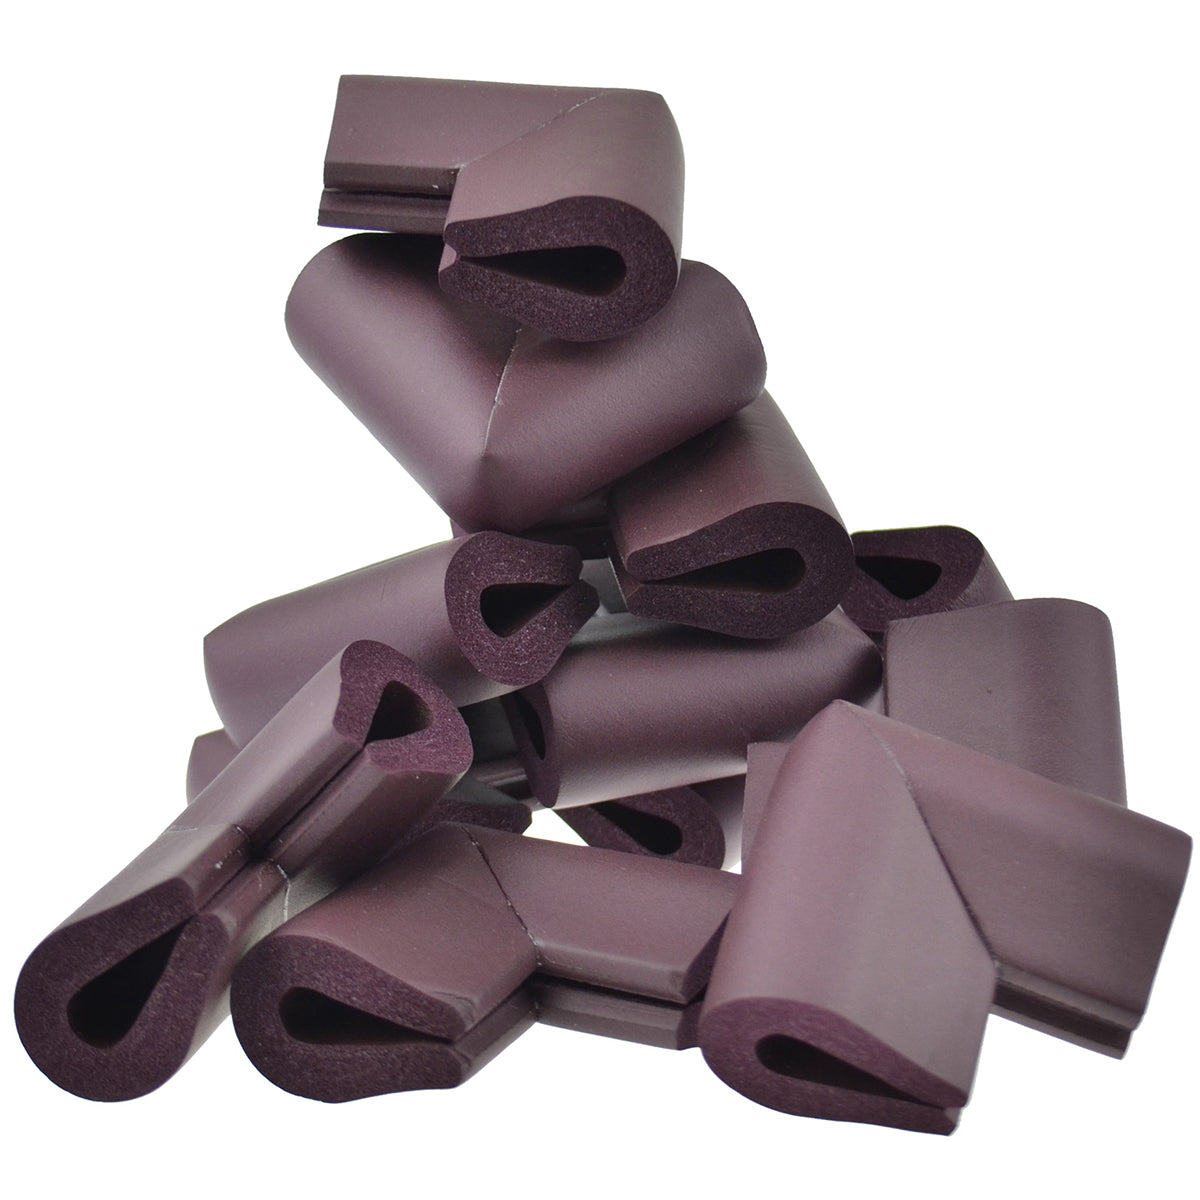 12 pieces randomly placed maroon u-shaped foam corner protectors show with a white background.